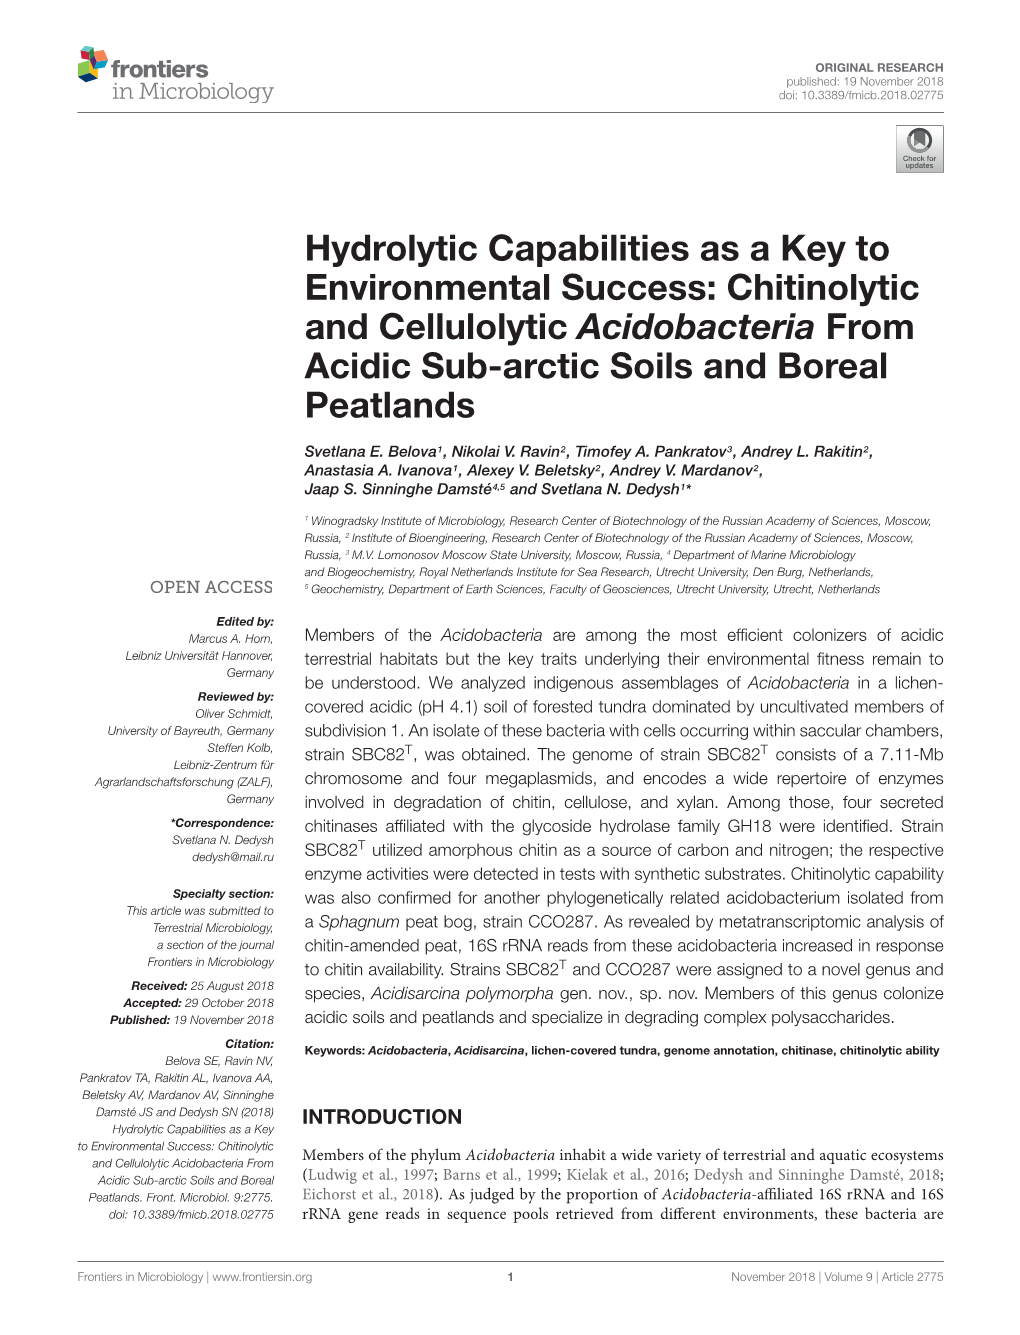 Hydrolytic Capabilities As a Key to Environmental Success: Chitinolytic and Cellulolytic Acidobacteria from Acidic Sub-Arctic Soils and Boreal Peatlands